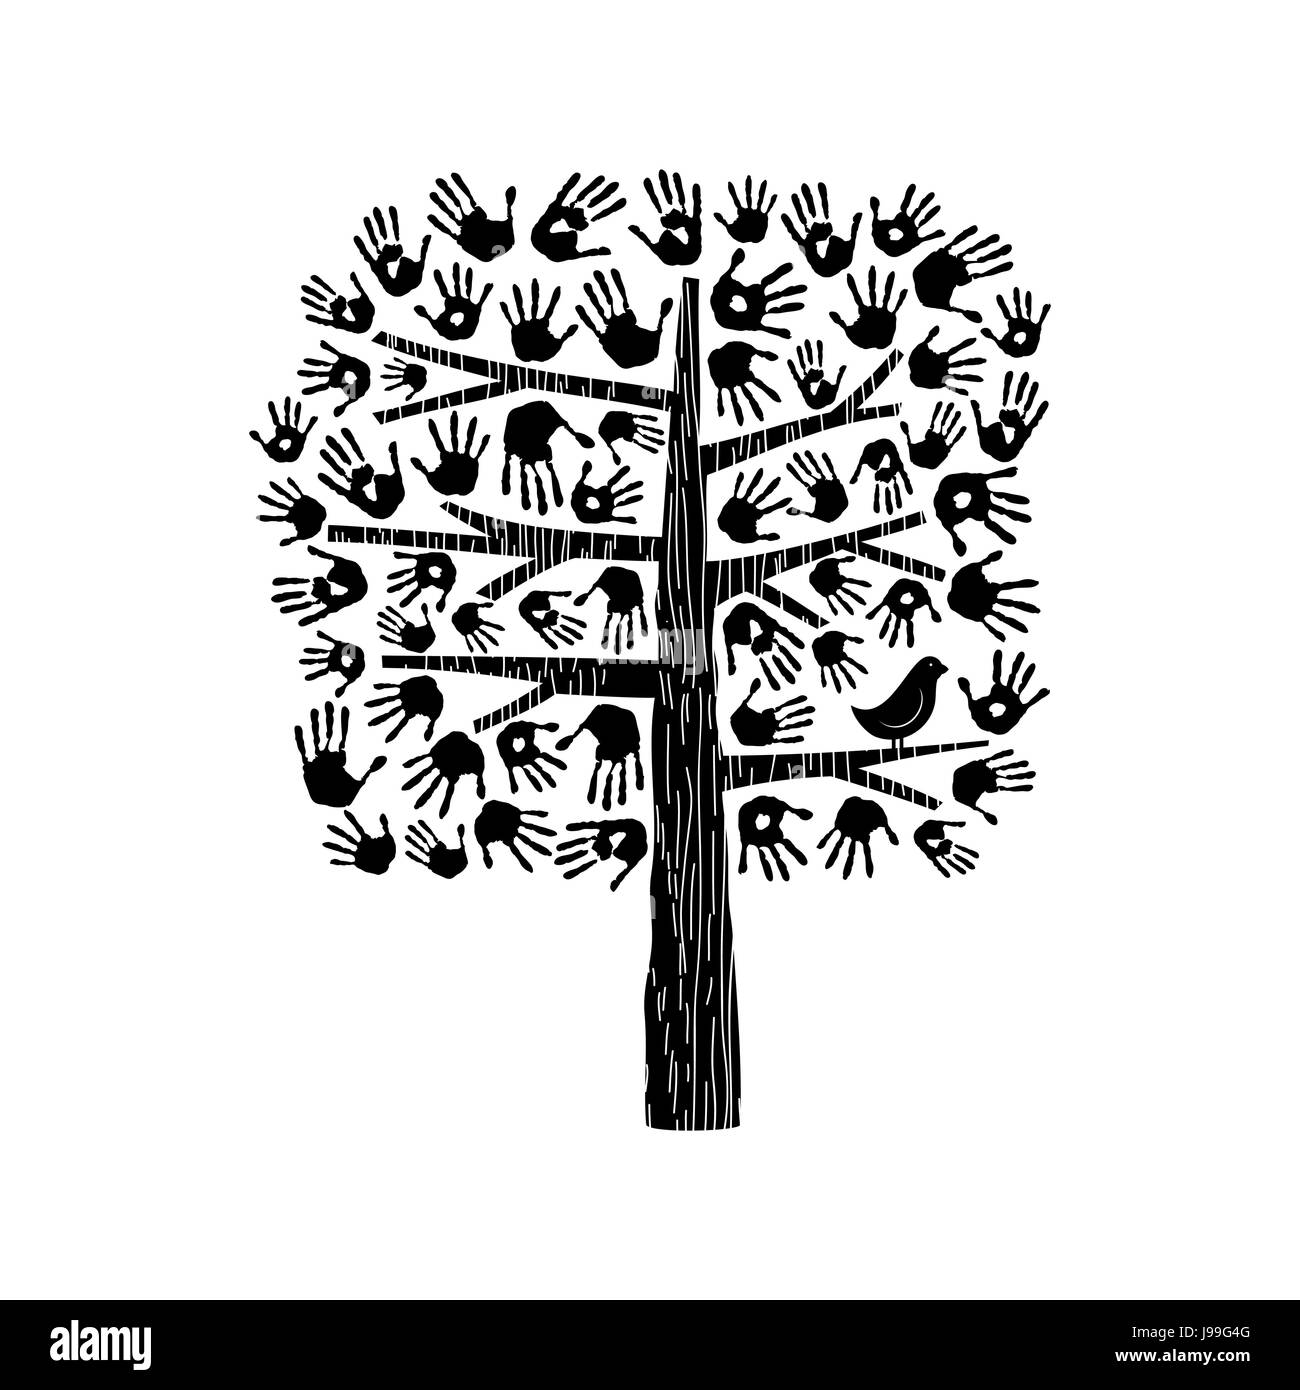 helping hands tree clipart